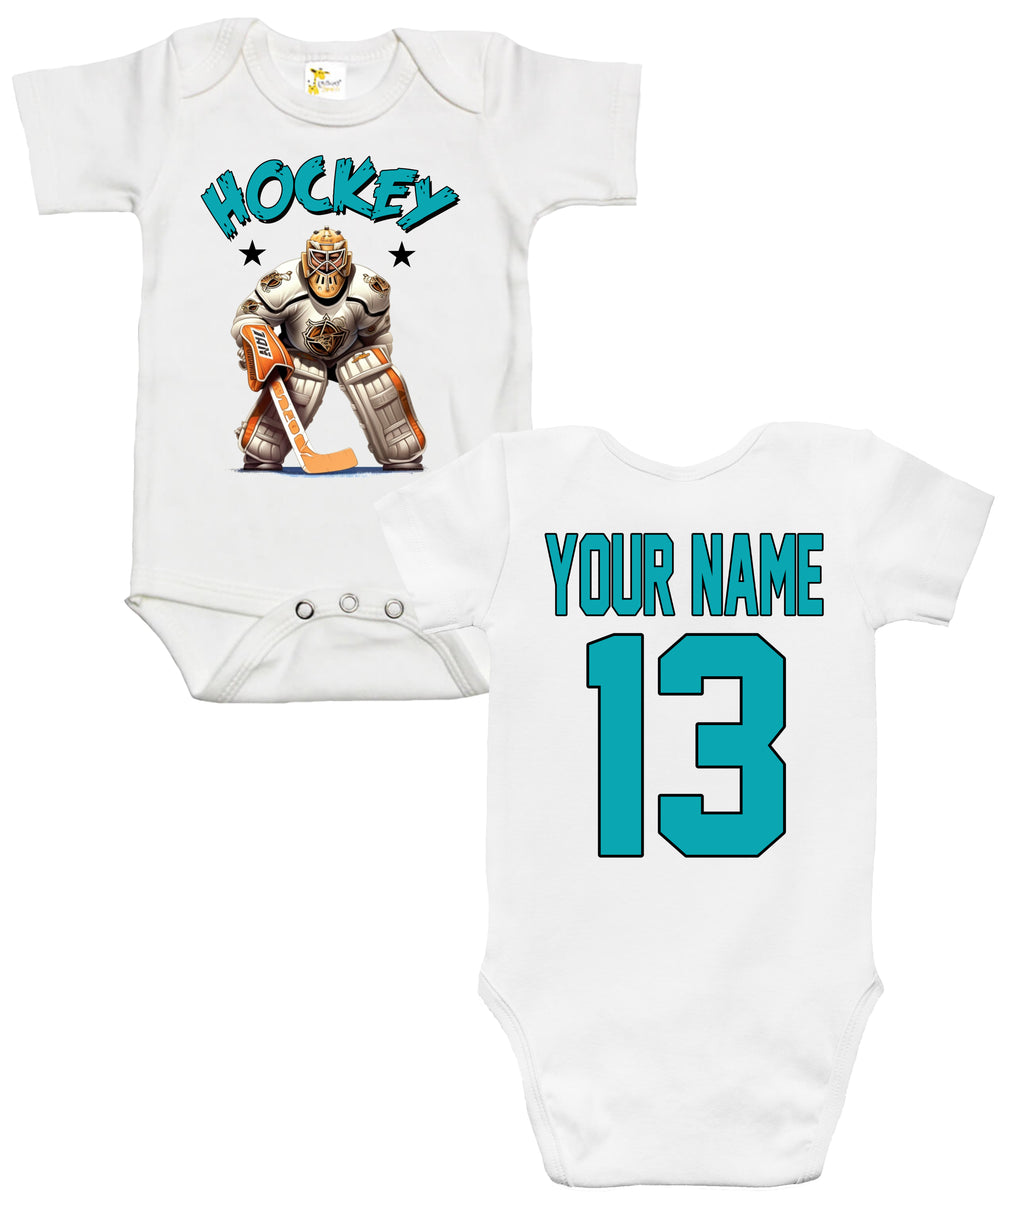 Custom Baby Bodysuit - Hockey Jersey with Name and Number on Back